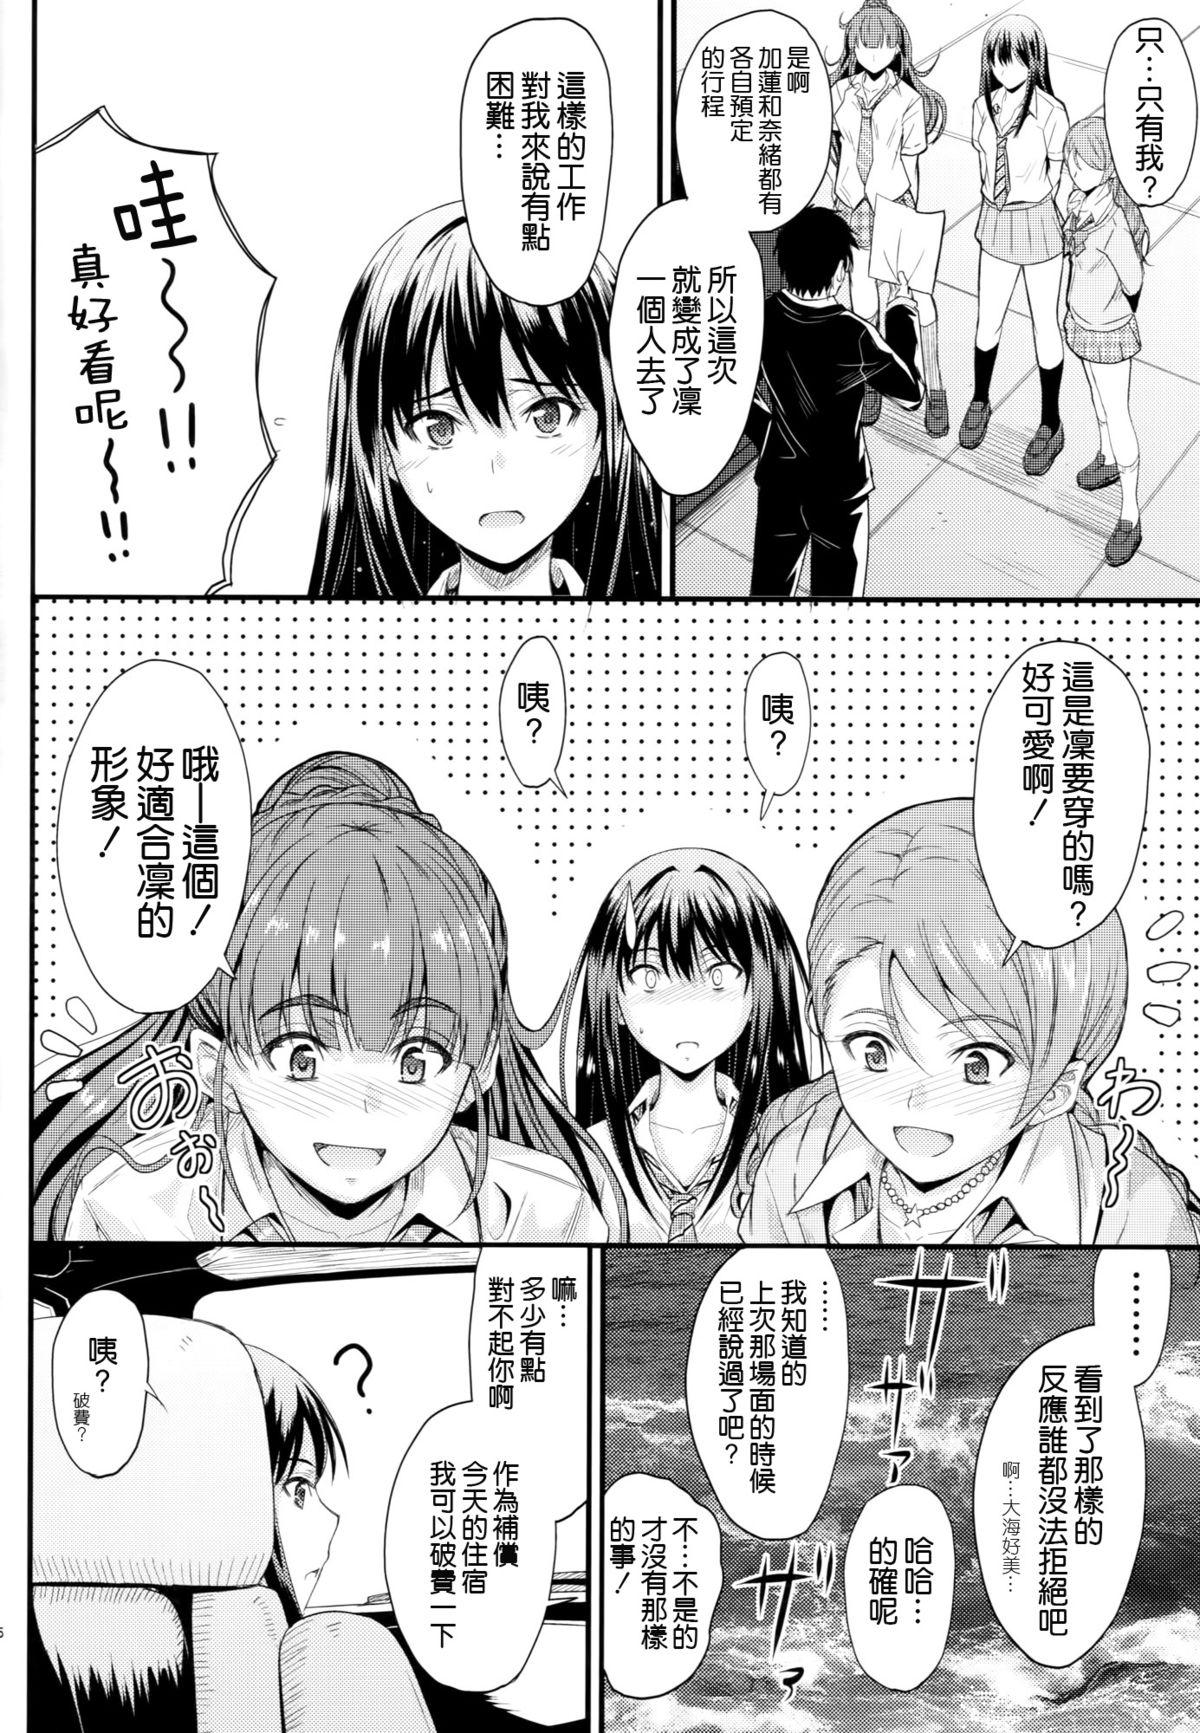 Groupsex Step Up - The idolmaster Stripping - Page 6